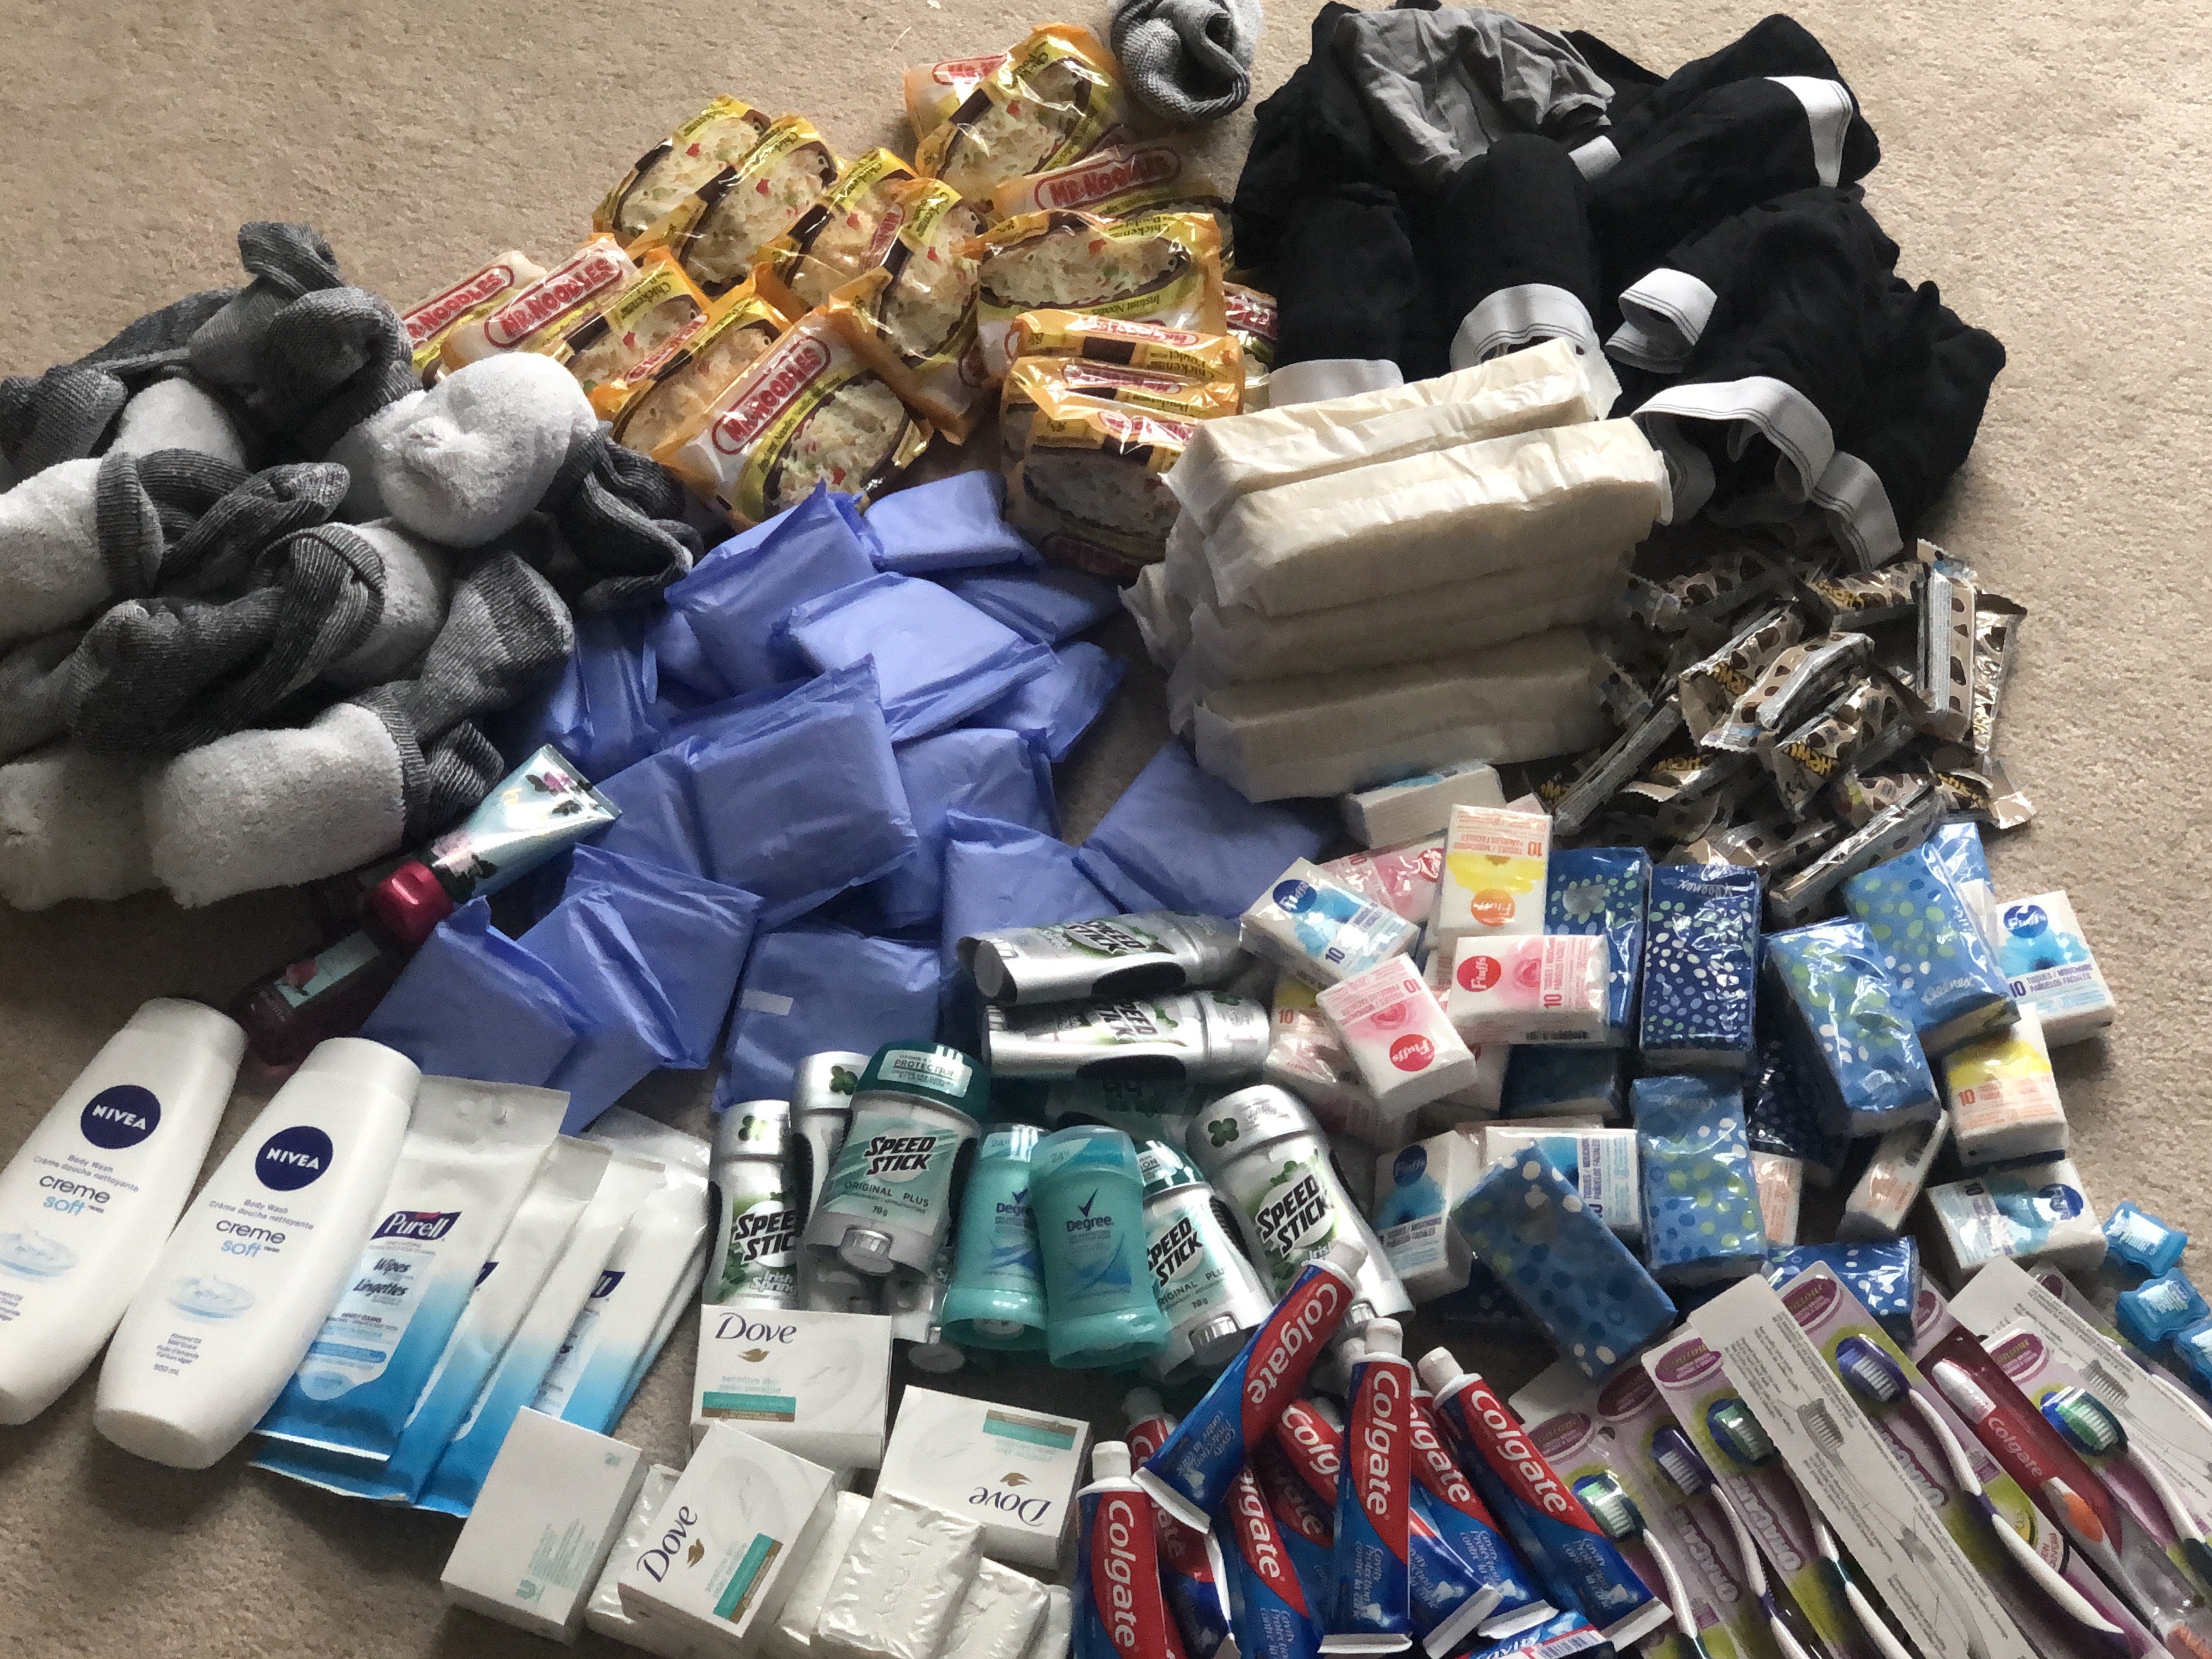 A pile of several dozen donated personal products, including soap, toothbrushes and socks along with packaged noodles and crackers and other snacks on a carpeted floor. 